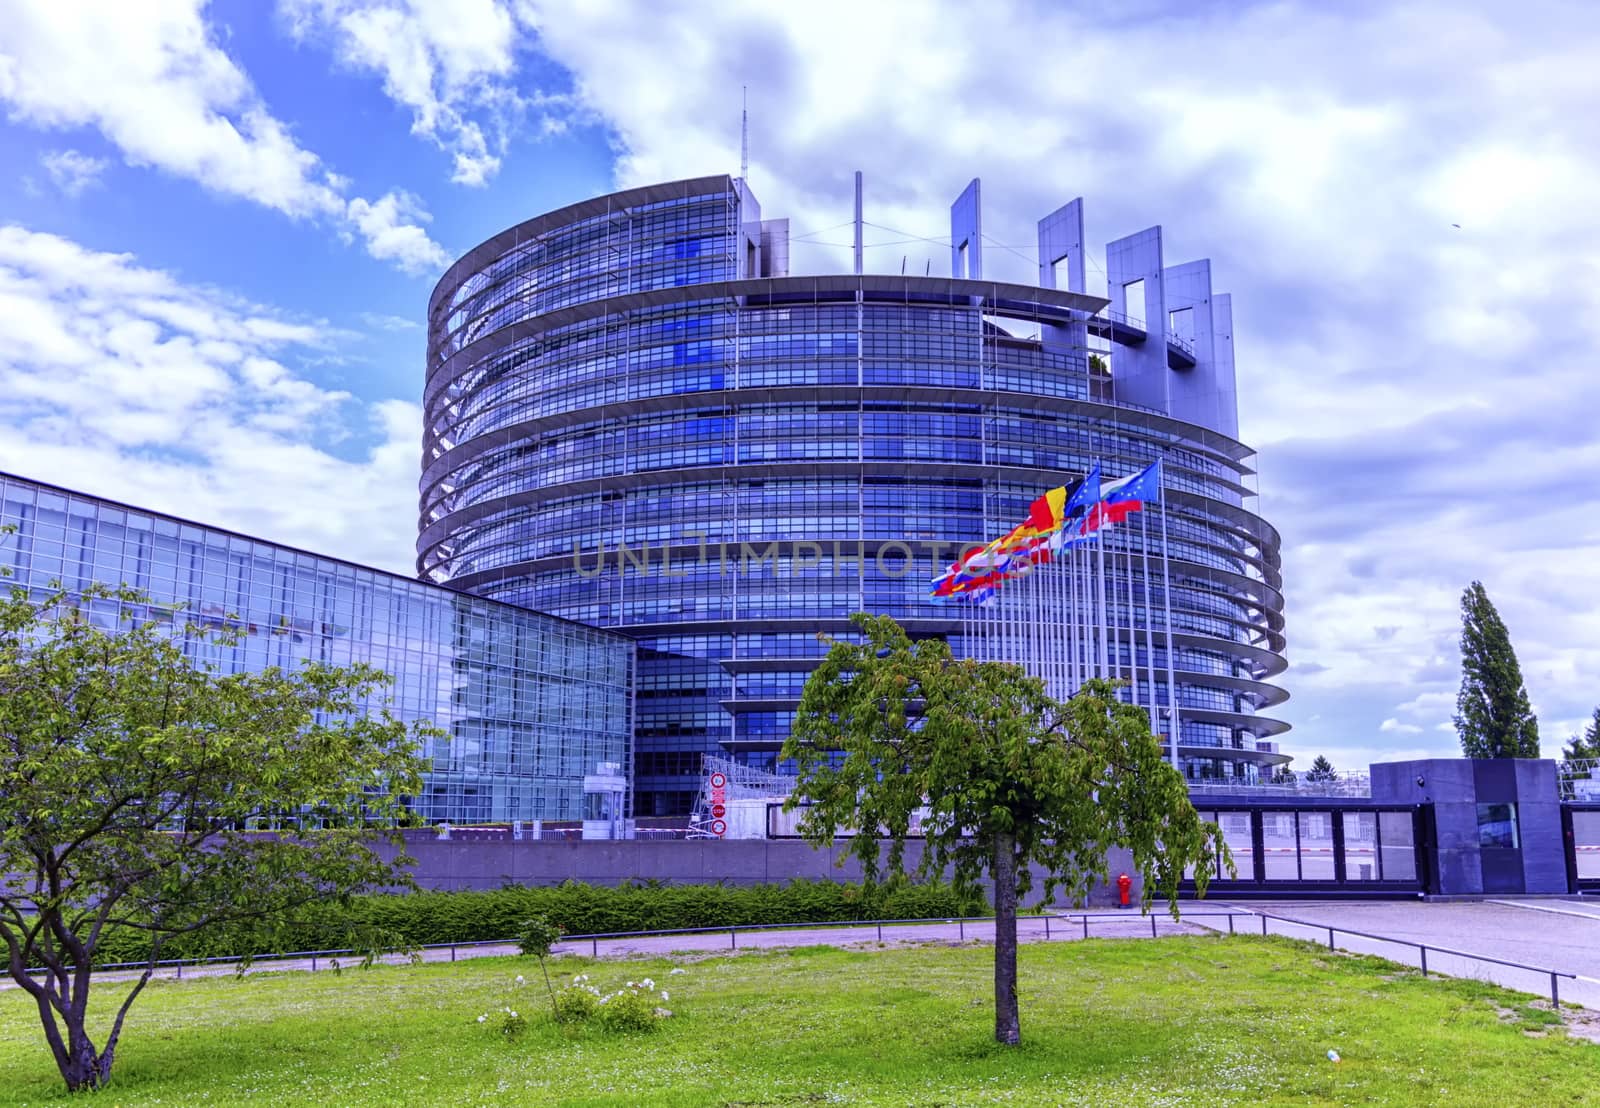 European Parliament in Strabourg, France by Elenaphotos21